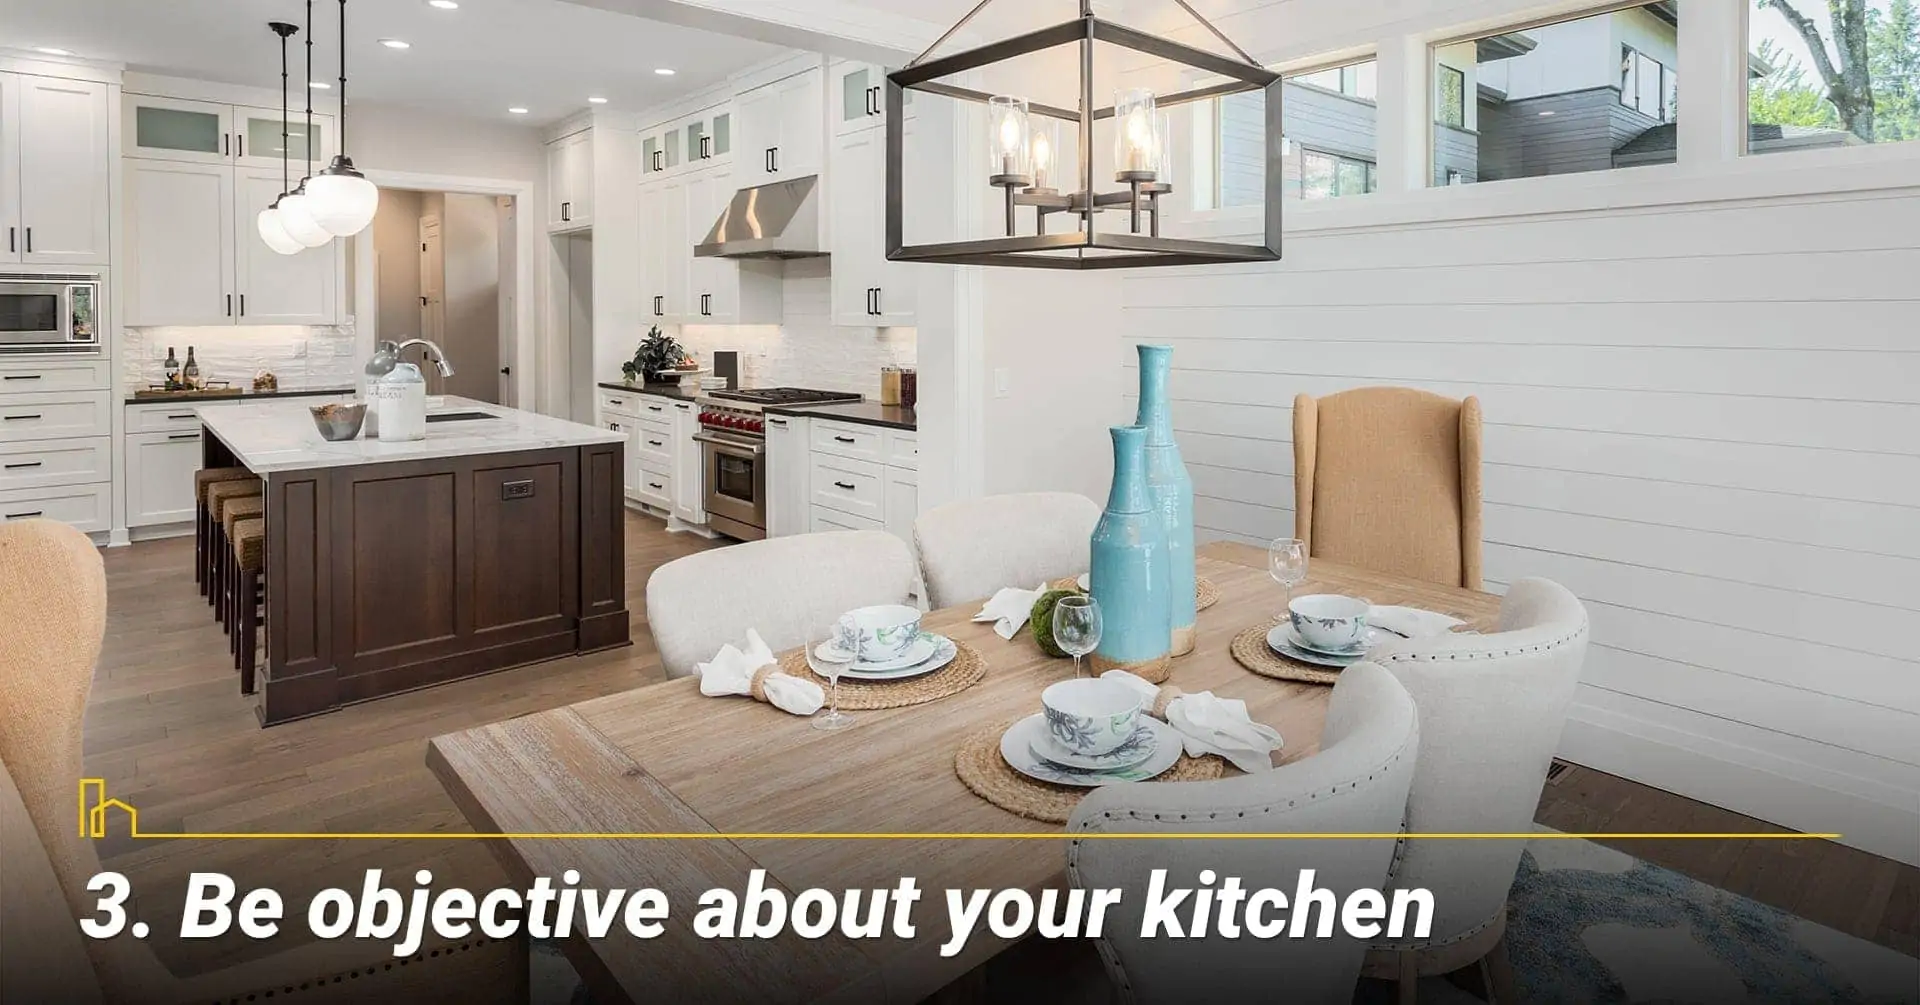 Be objective about your kitchen, upgrade your kitchen